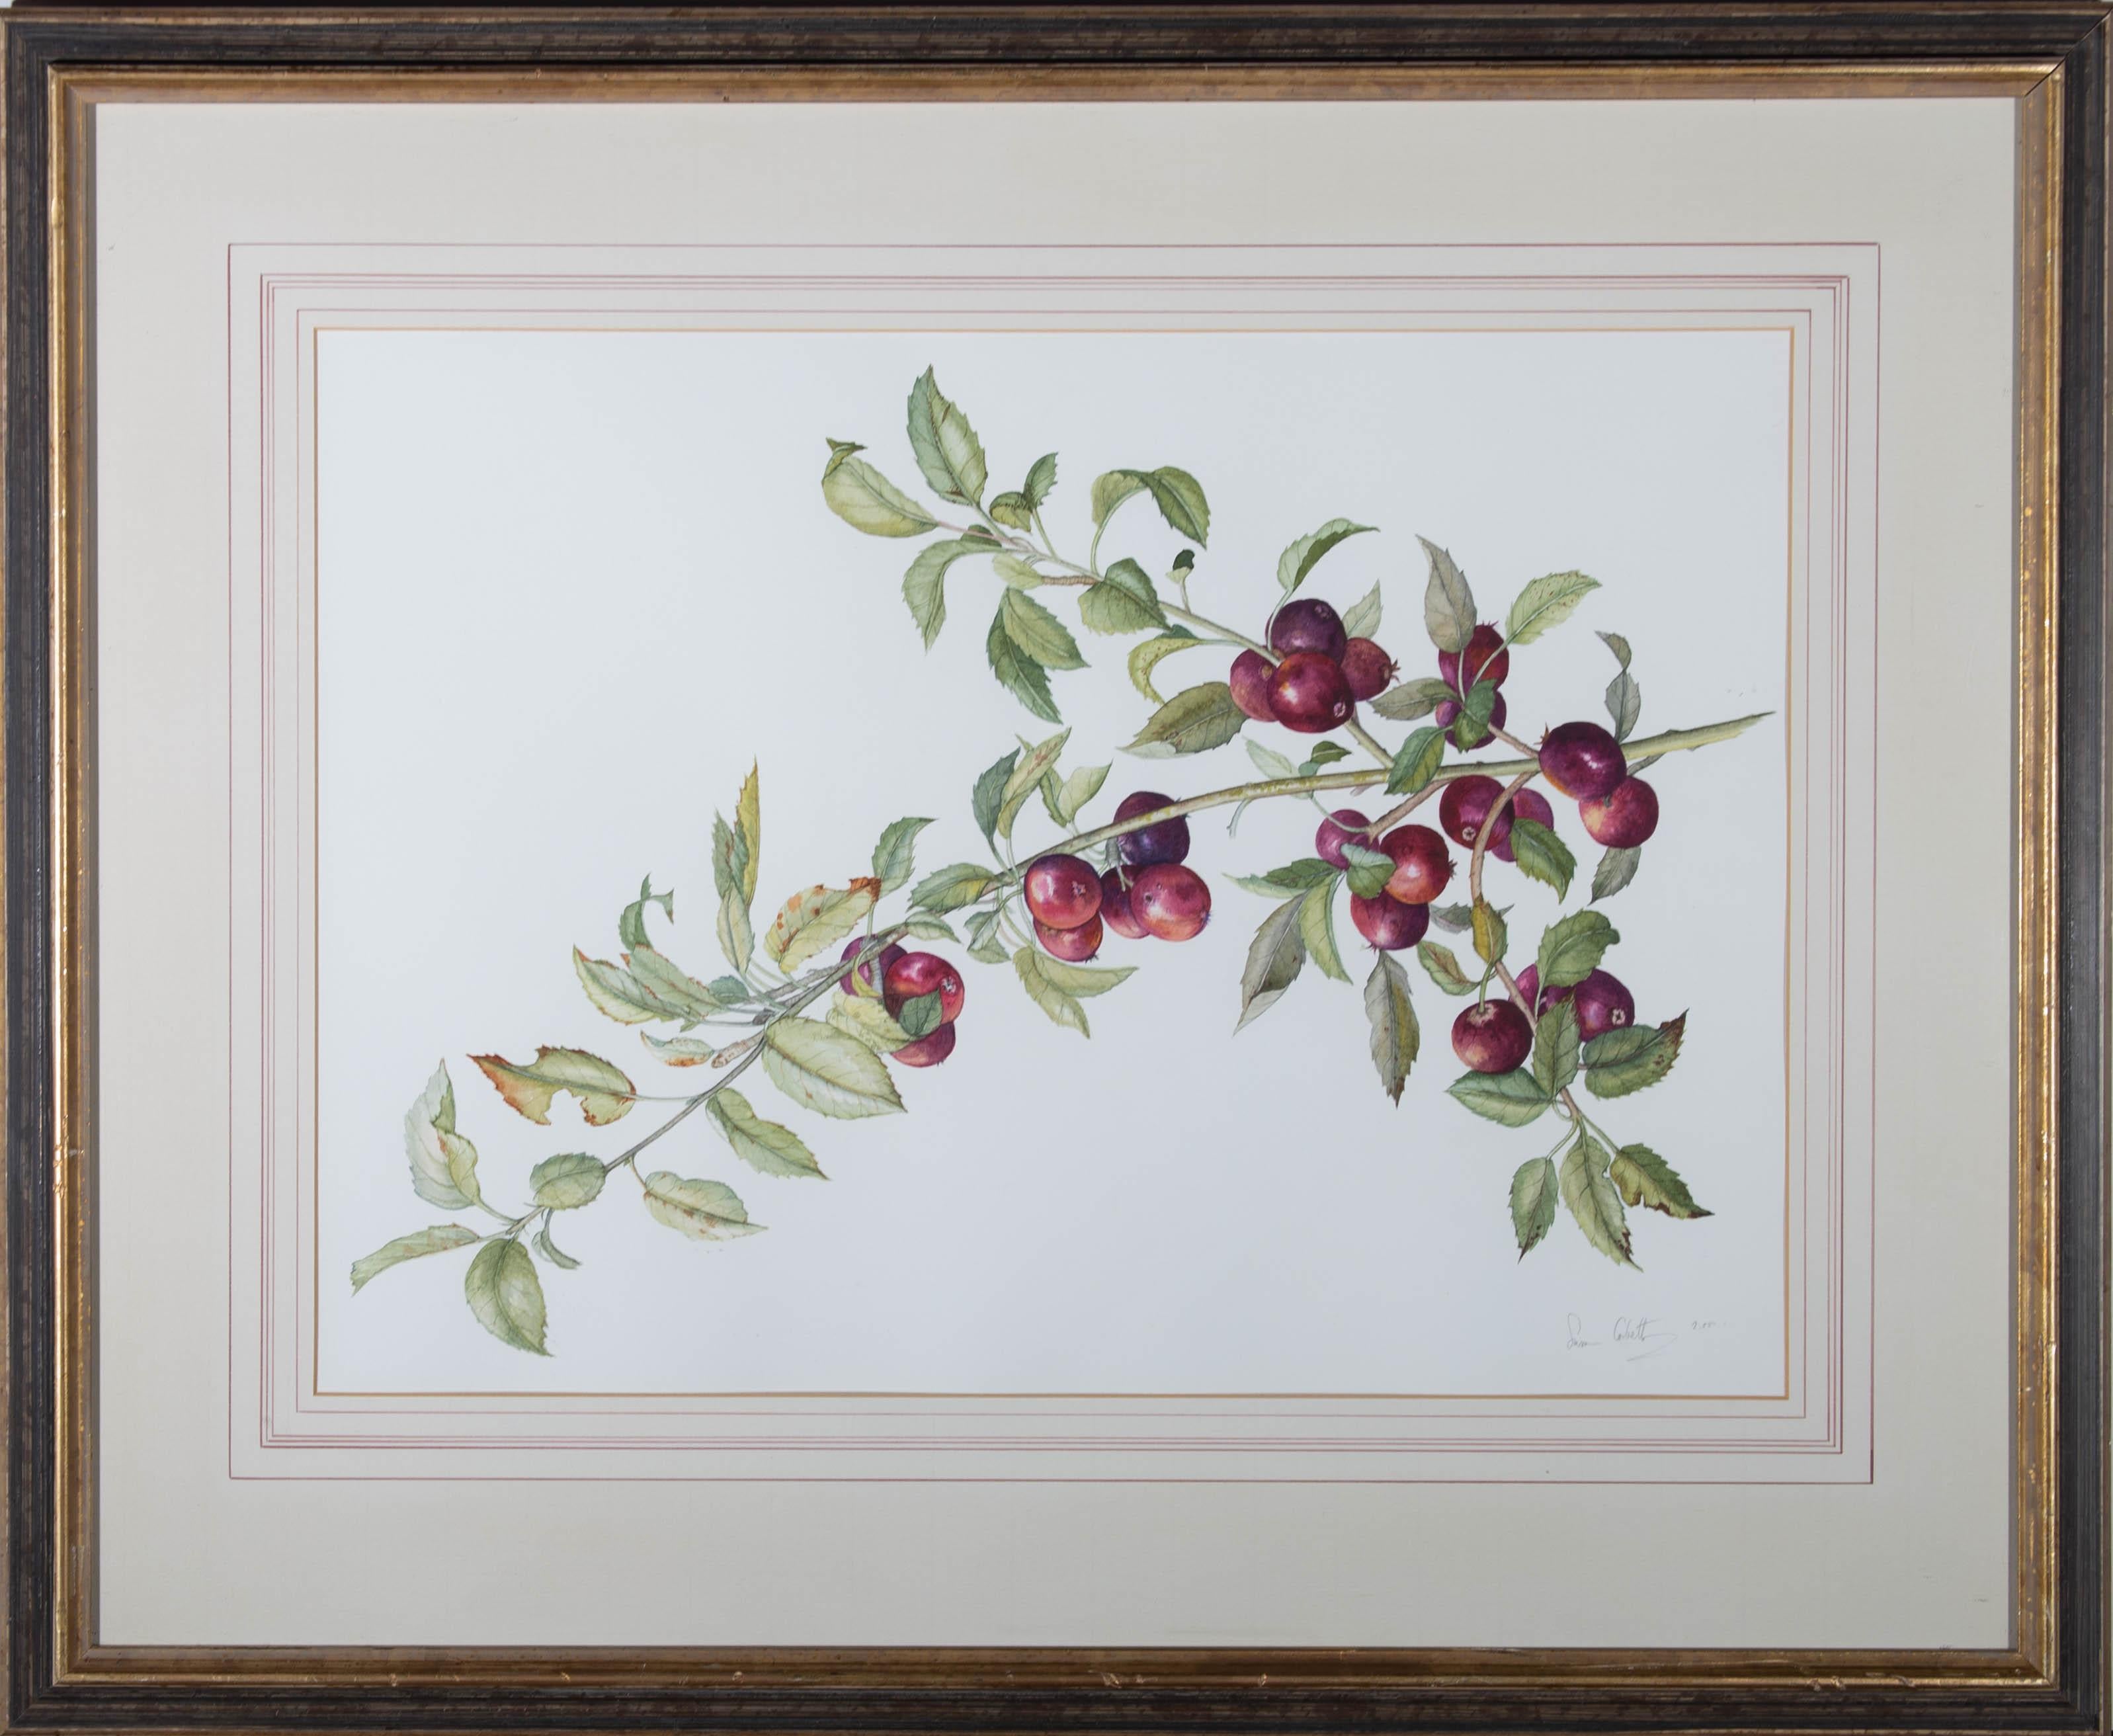 A delightful study of a crab apple branch laden with fruit. Painted in fine detail, the artist has captured the intricate leaves in delicate brush strokes. Signed and dated to the lower right. Well presented in a part-gilt frame. On wove.
